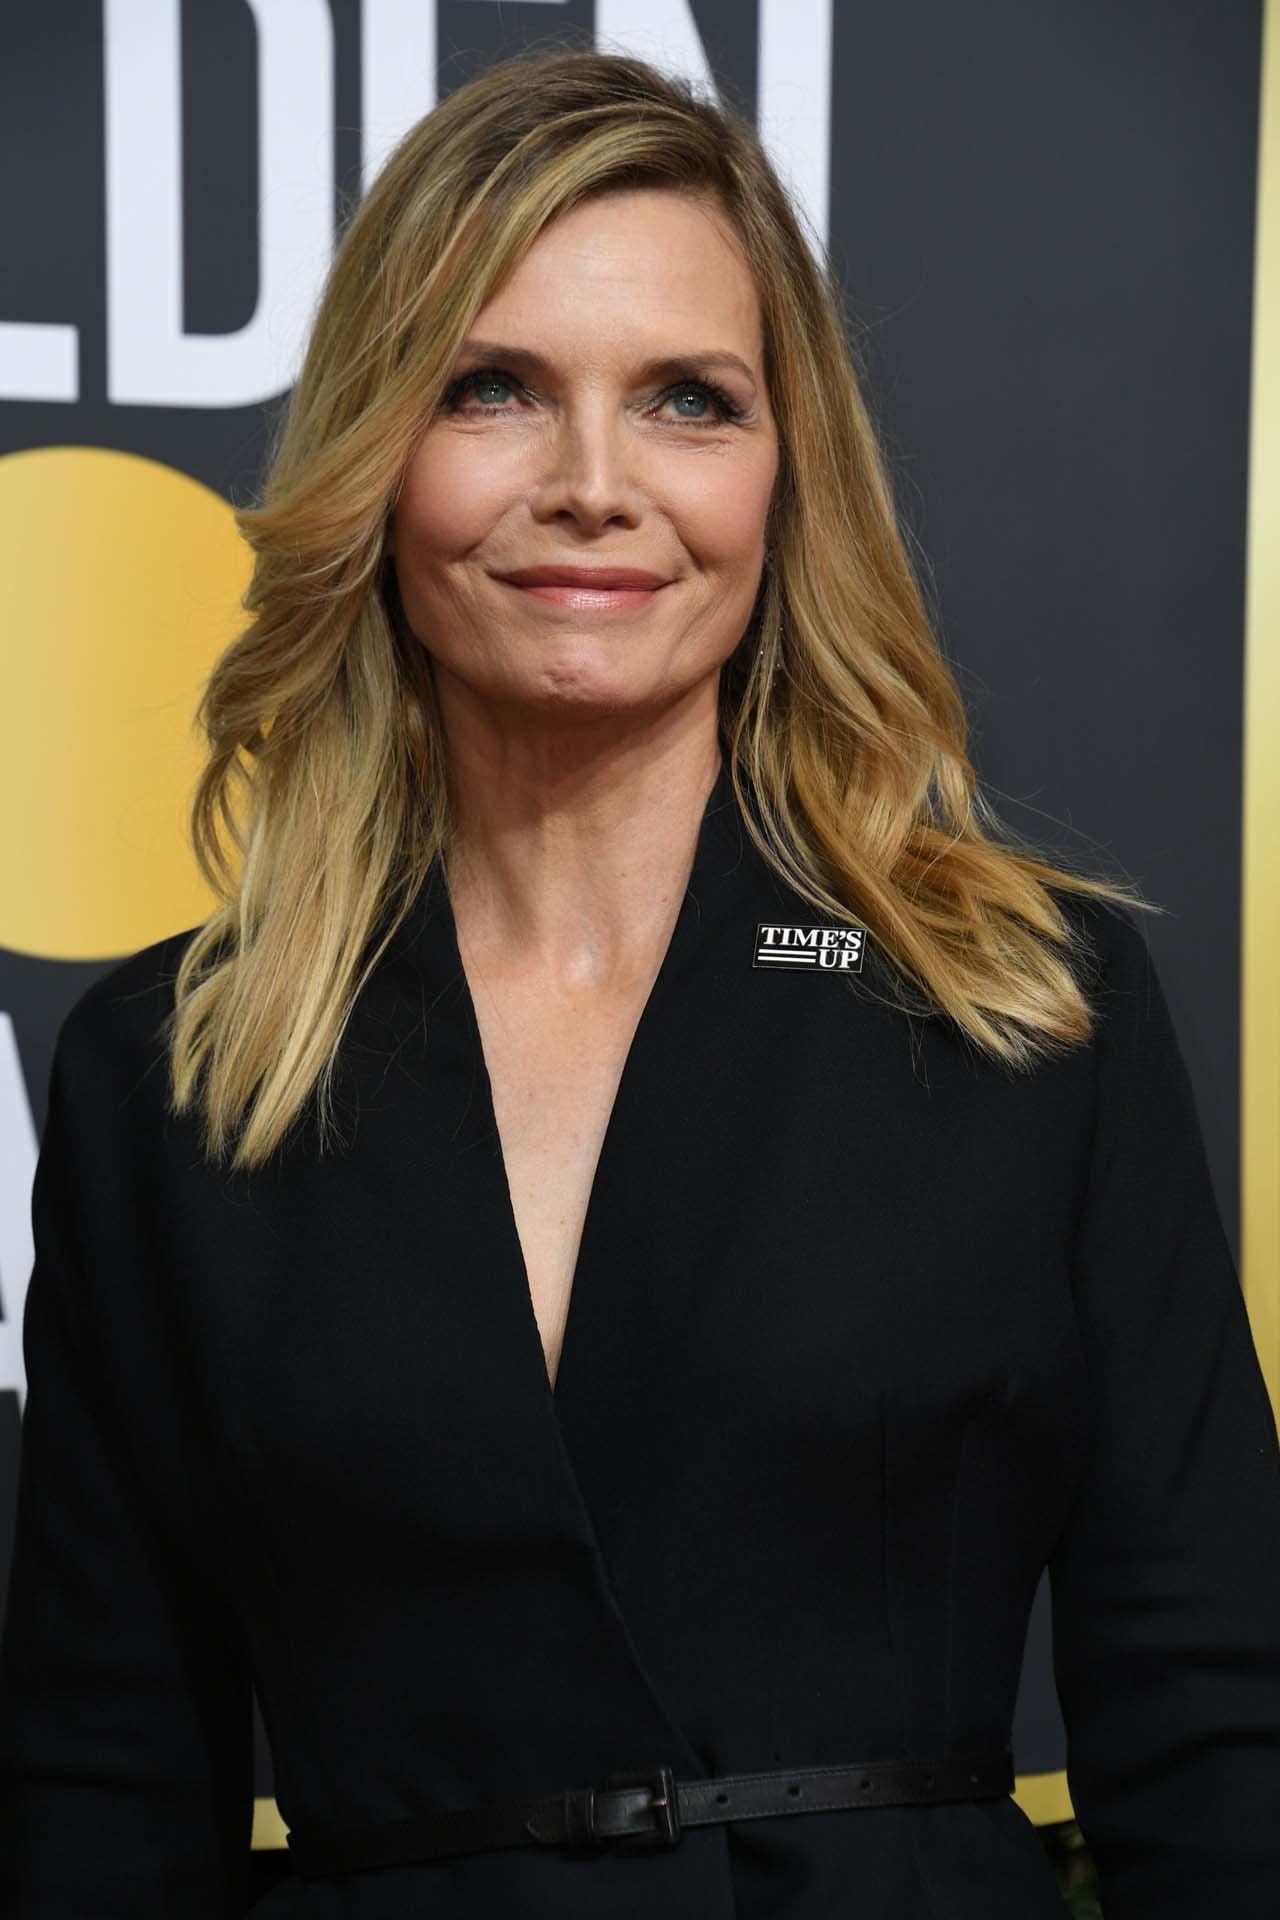 <h2>Michelle Pfeiffer</h2><p>Michelle Pfeiffer, who was relatively unknown at the time, played Pink Lady Stephanie Zinone in the 1982 film <a href="http://www.imdb.com/title/tt0084021/" target="_blank" rel="noopener"><em>Grease 2</em></a>, which received poor reviews and was nominated for Worst Picture at the Stinkers Bad Movie Awards. Luckily, Pfeiffer rose to fame the following year for her role in <em>Scarface</em> and put the unfortunate film behind her.</p>